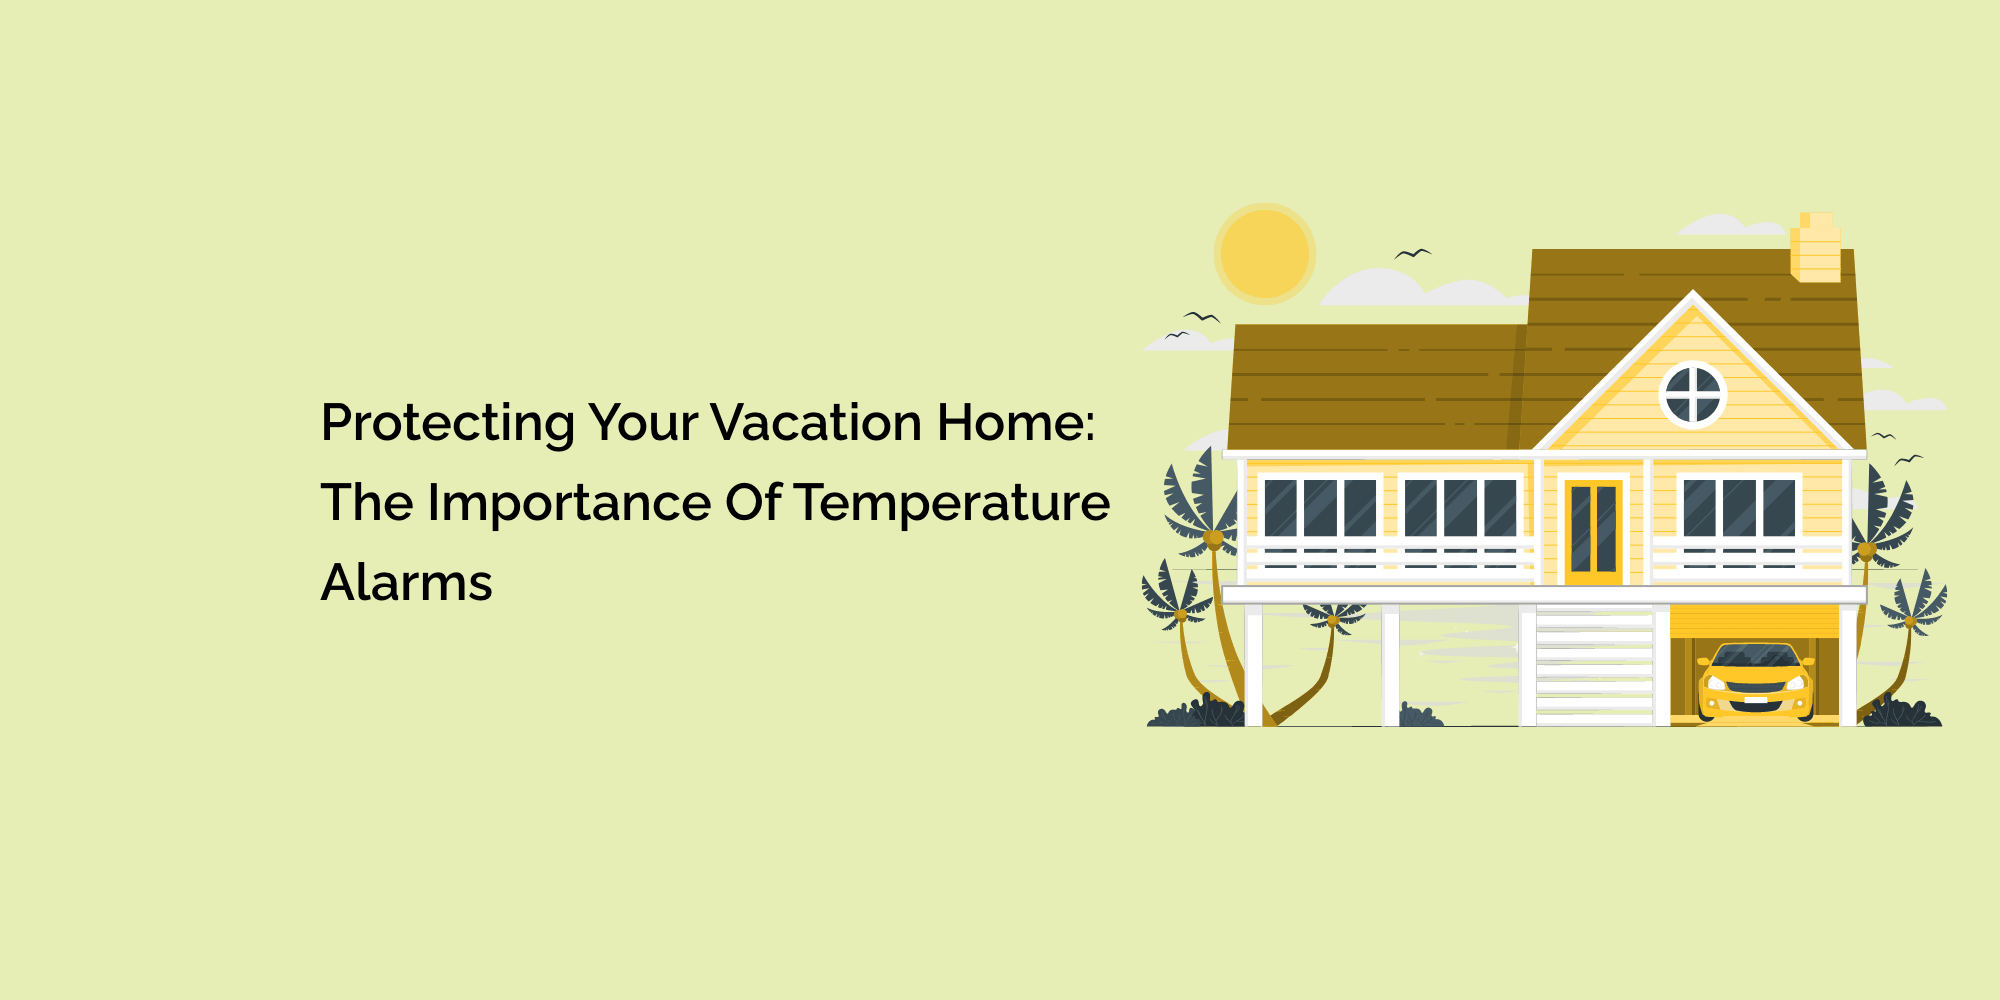 Protecting Your Vacation Home: The Importance of Temperature Alarms